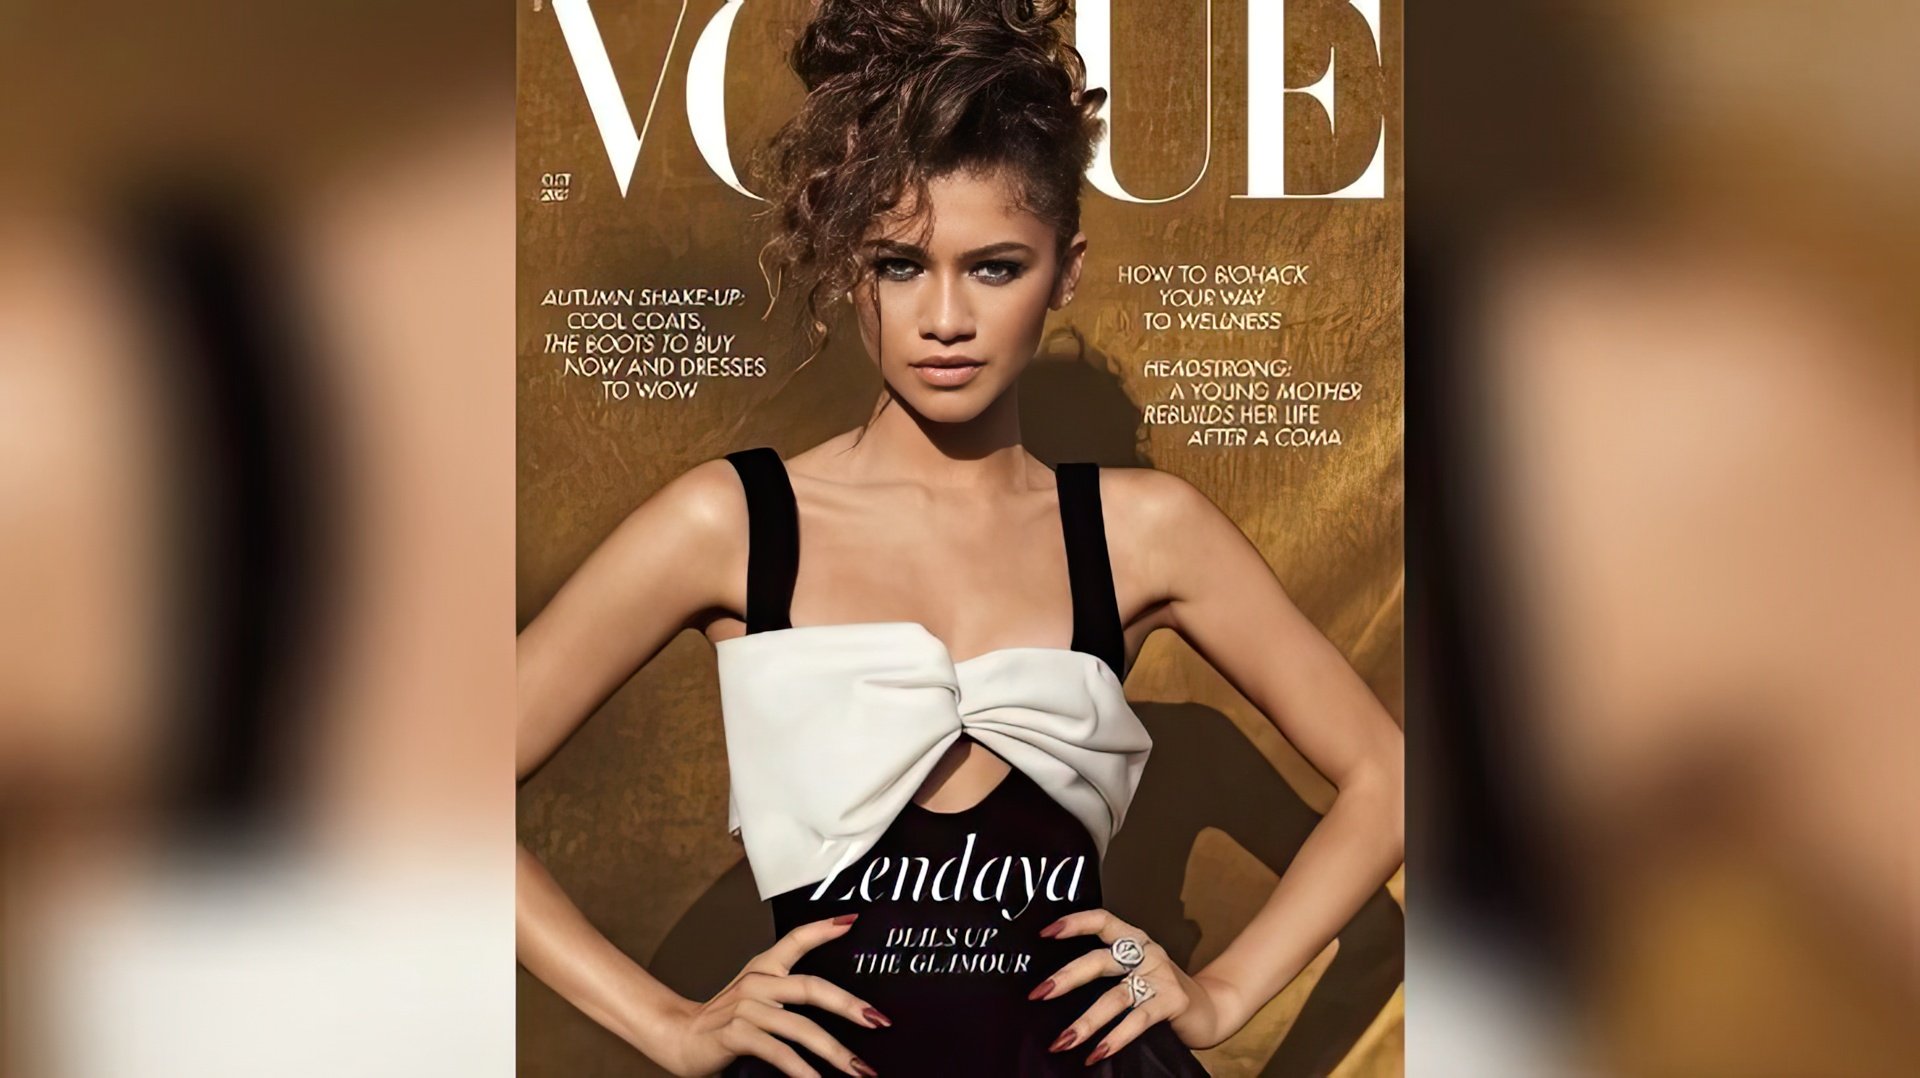 Zendaya on the Cover of Vogue